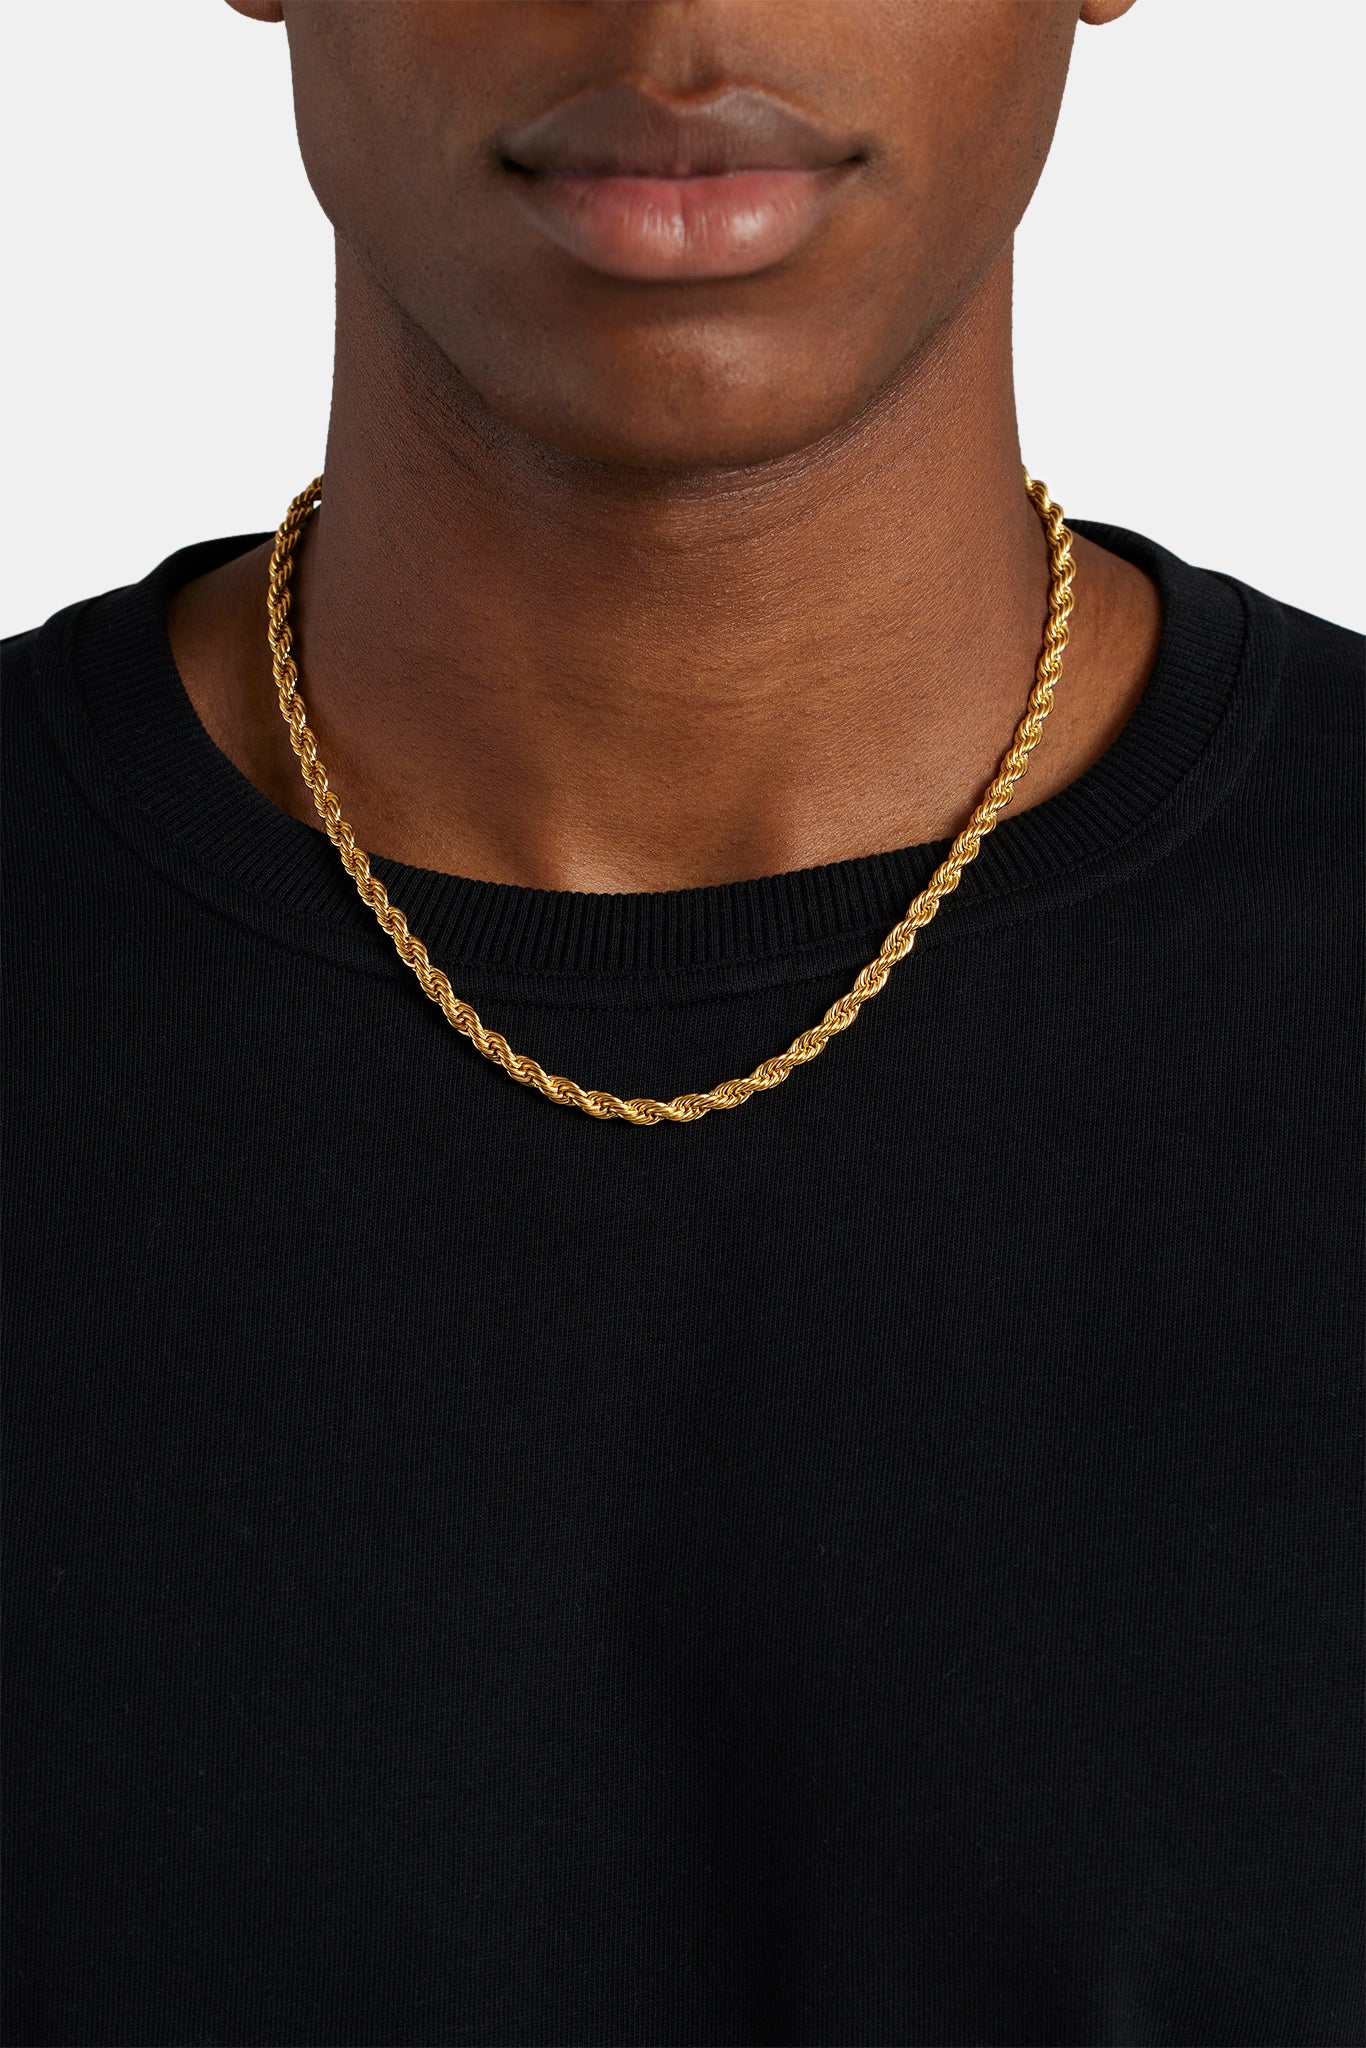 5mm Rope Chain Classic Hip Hop Jewelry for Men in 18K White Gold - Size 16